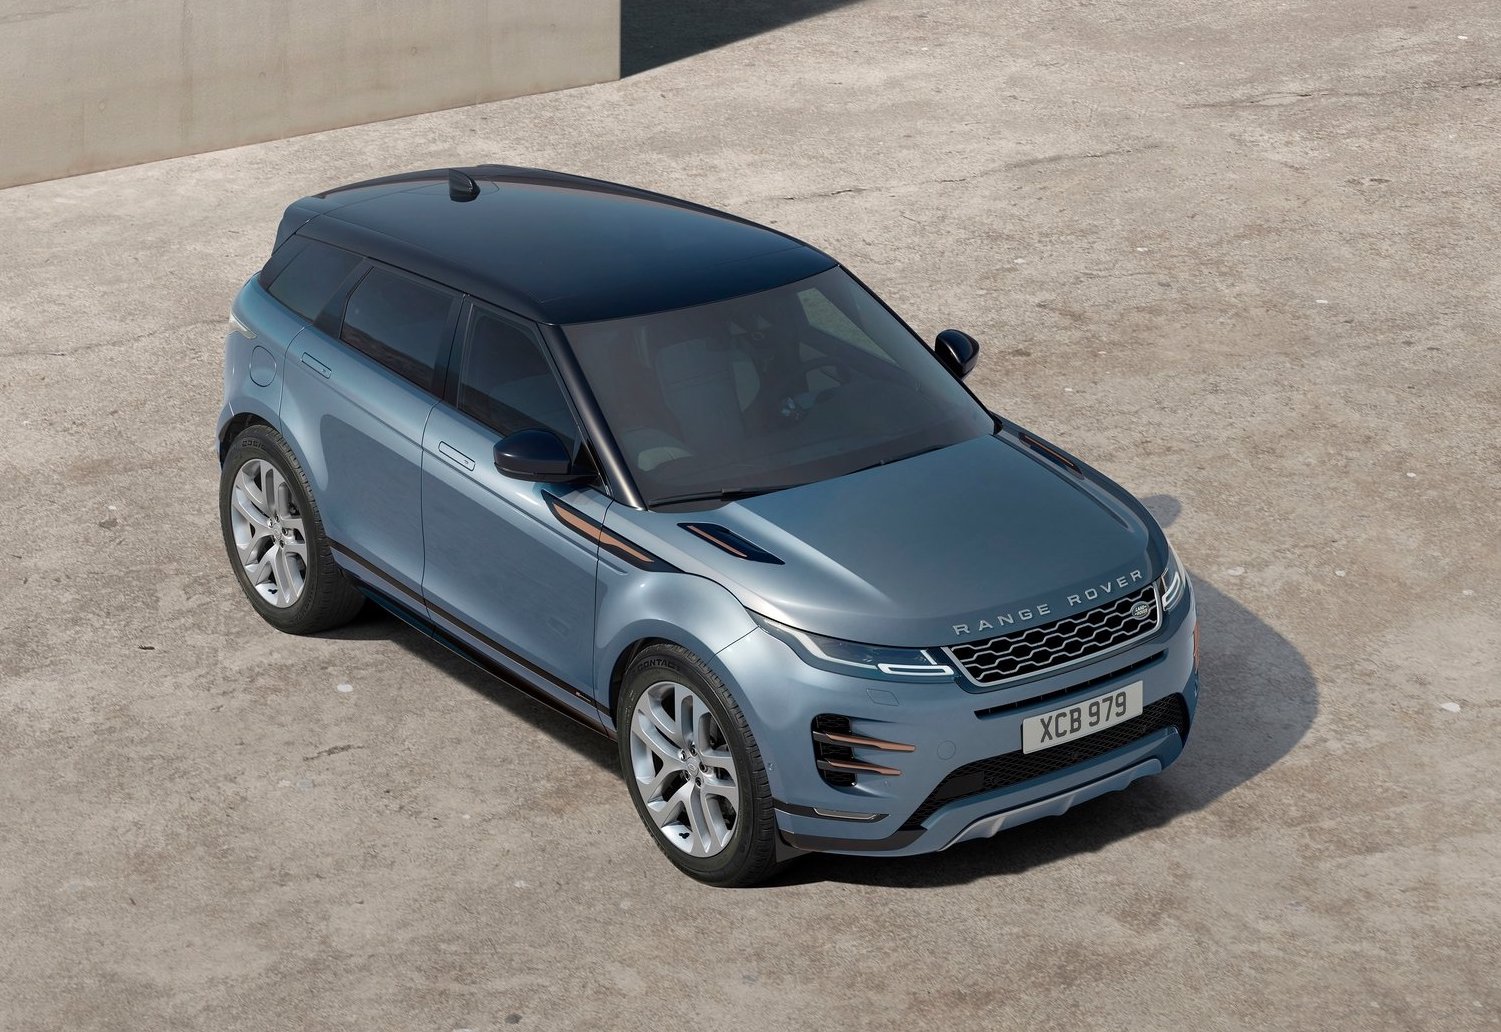 2020 Range Rover Evoque unveiled, on sale from $64,640